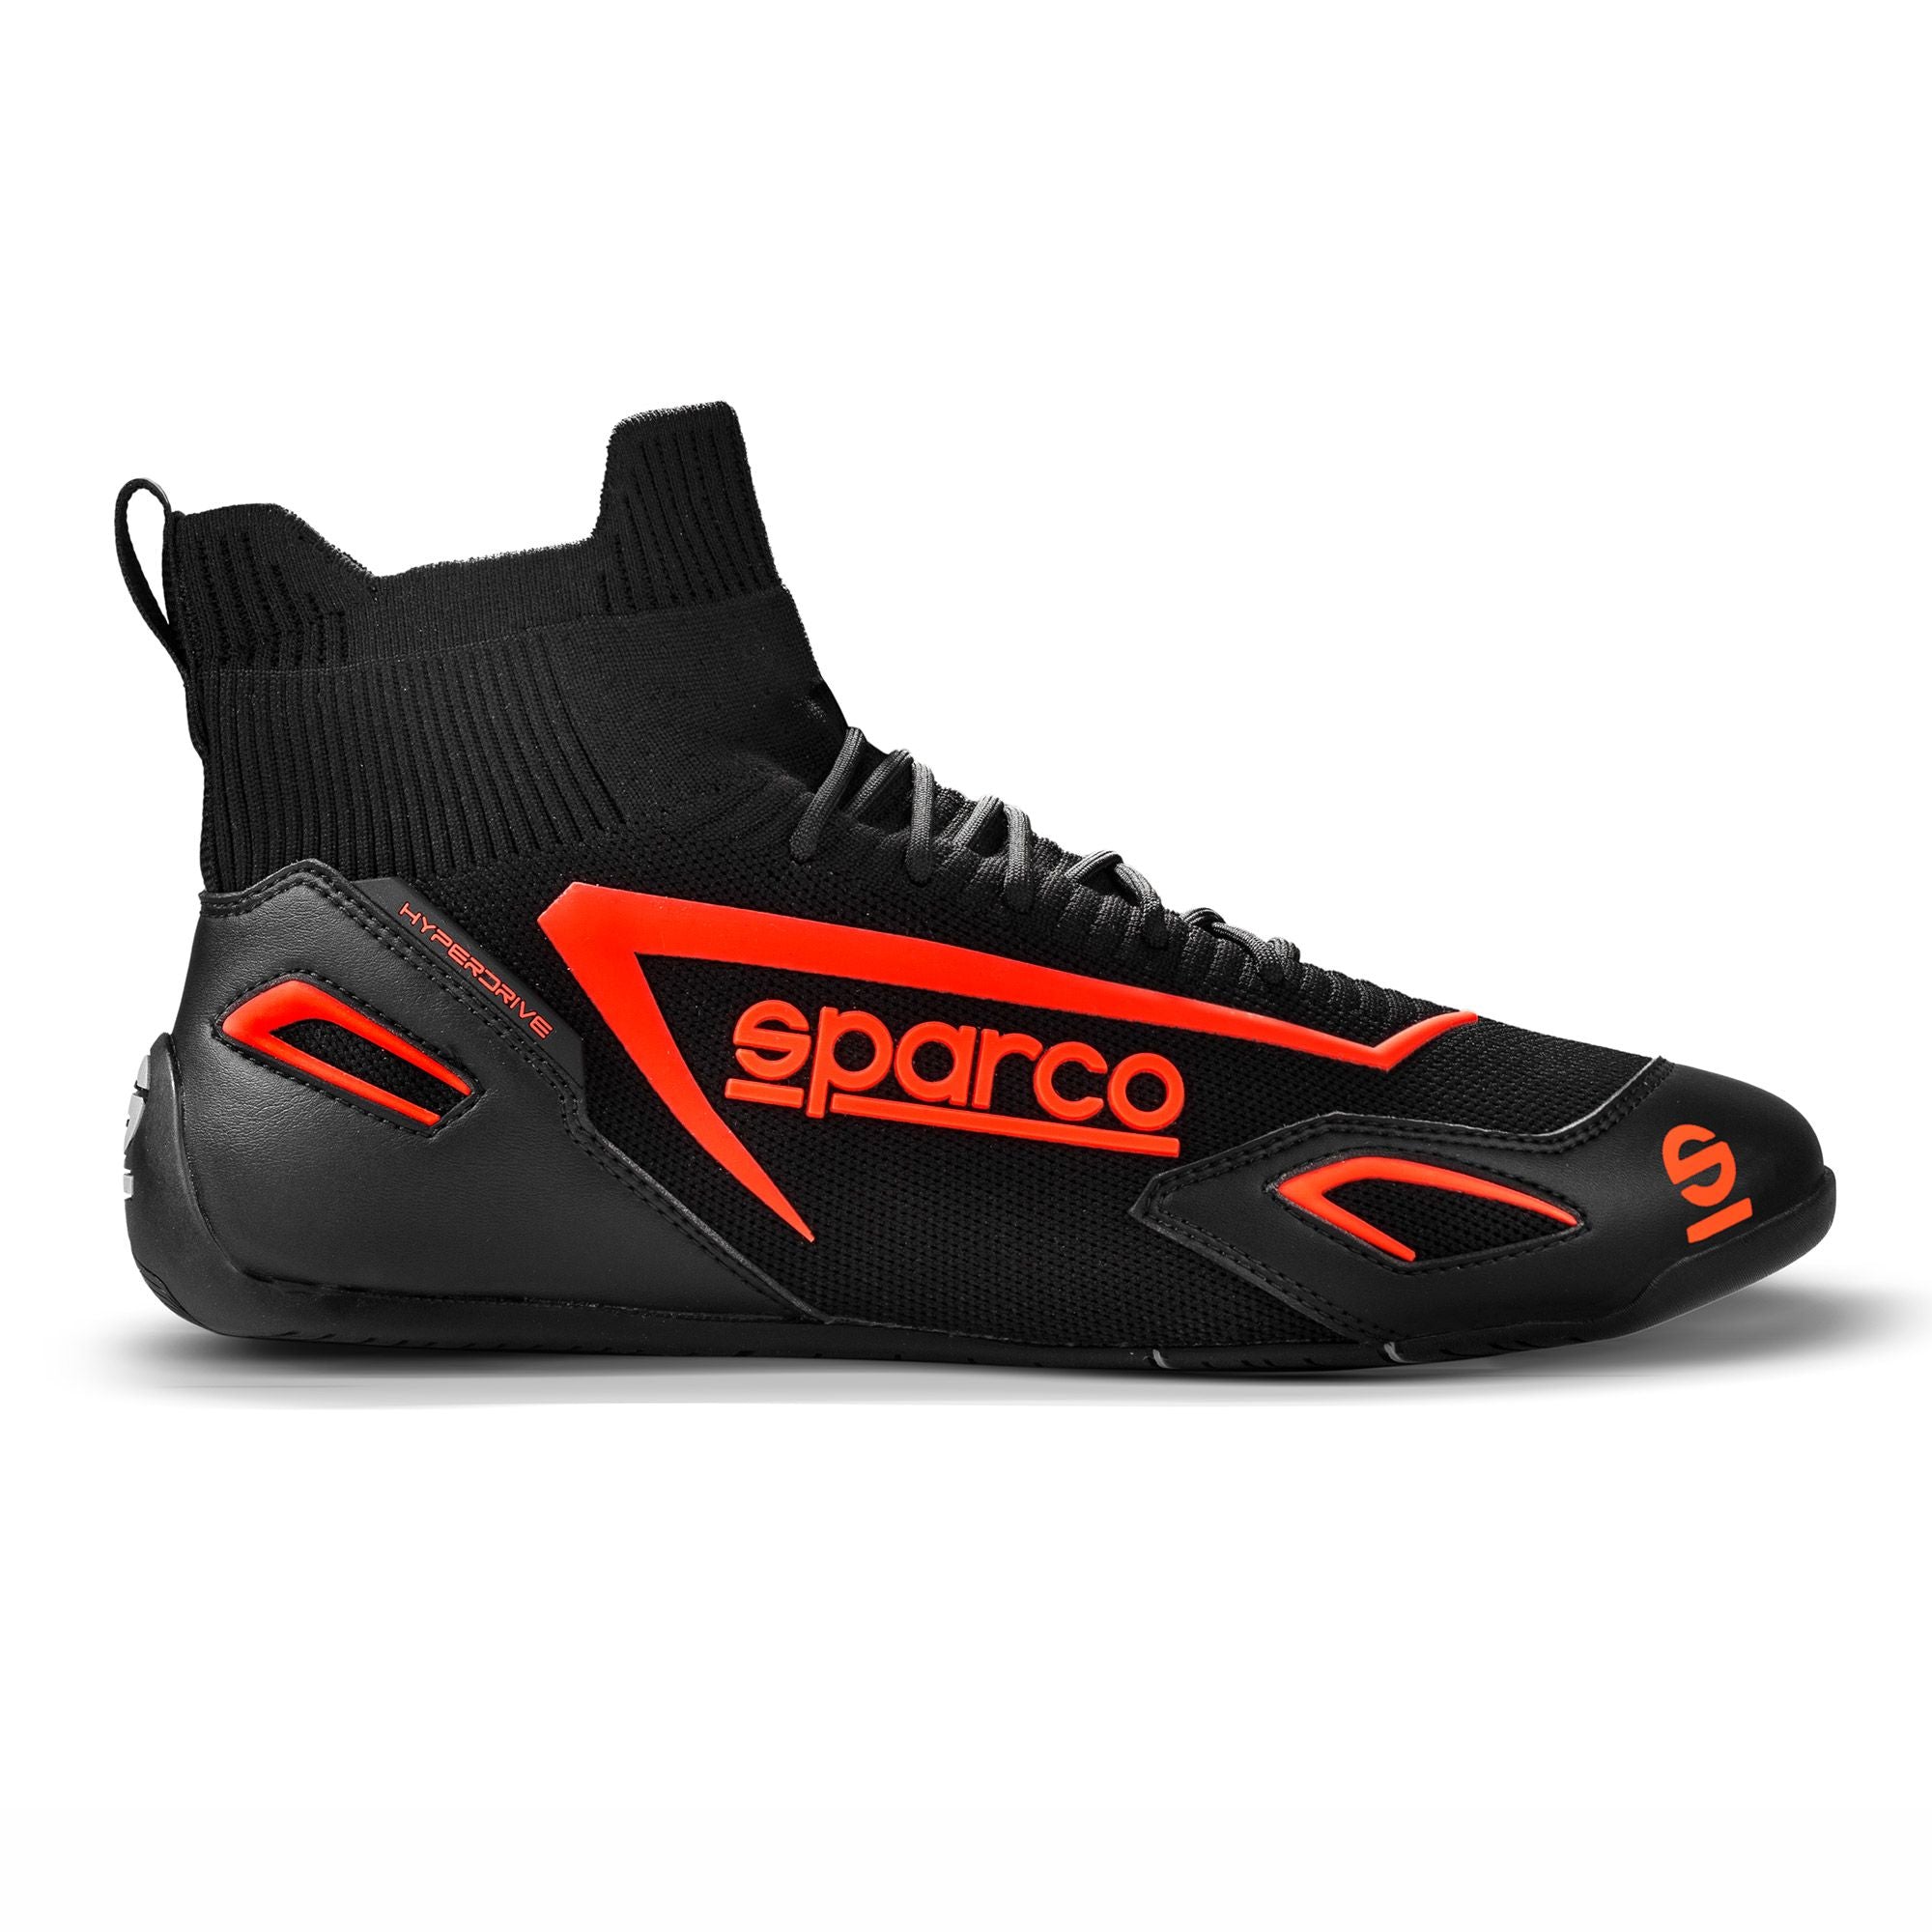 SPARCO 00129344NRRS Gaming sim racing shoes HYPERDRIVE, black/red, size 44 Photo-3 